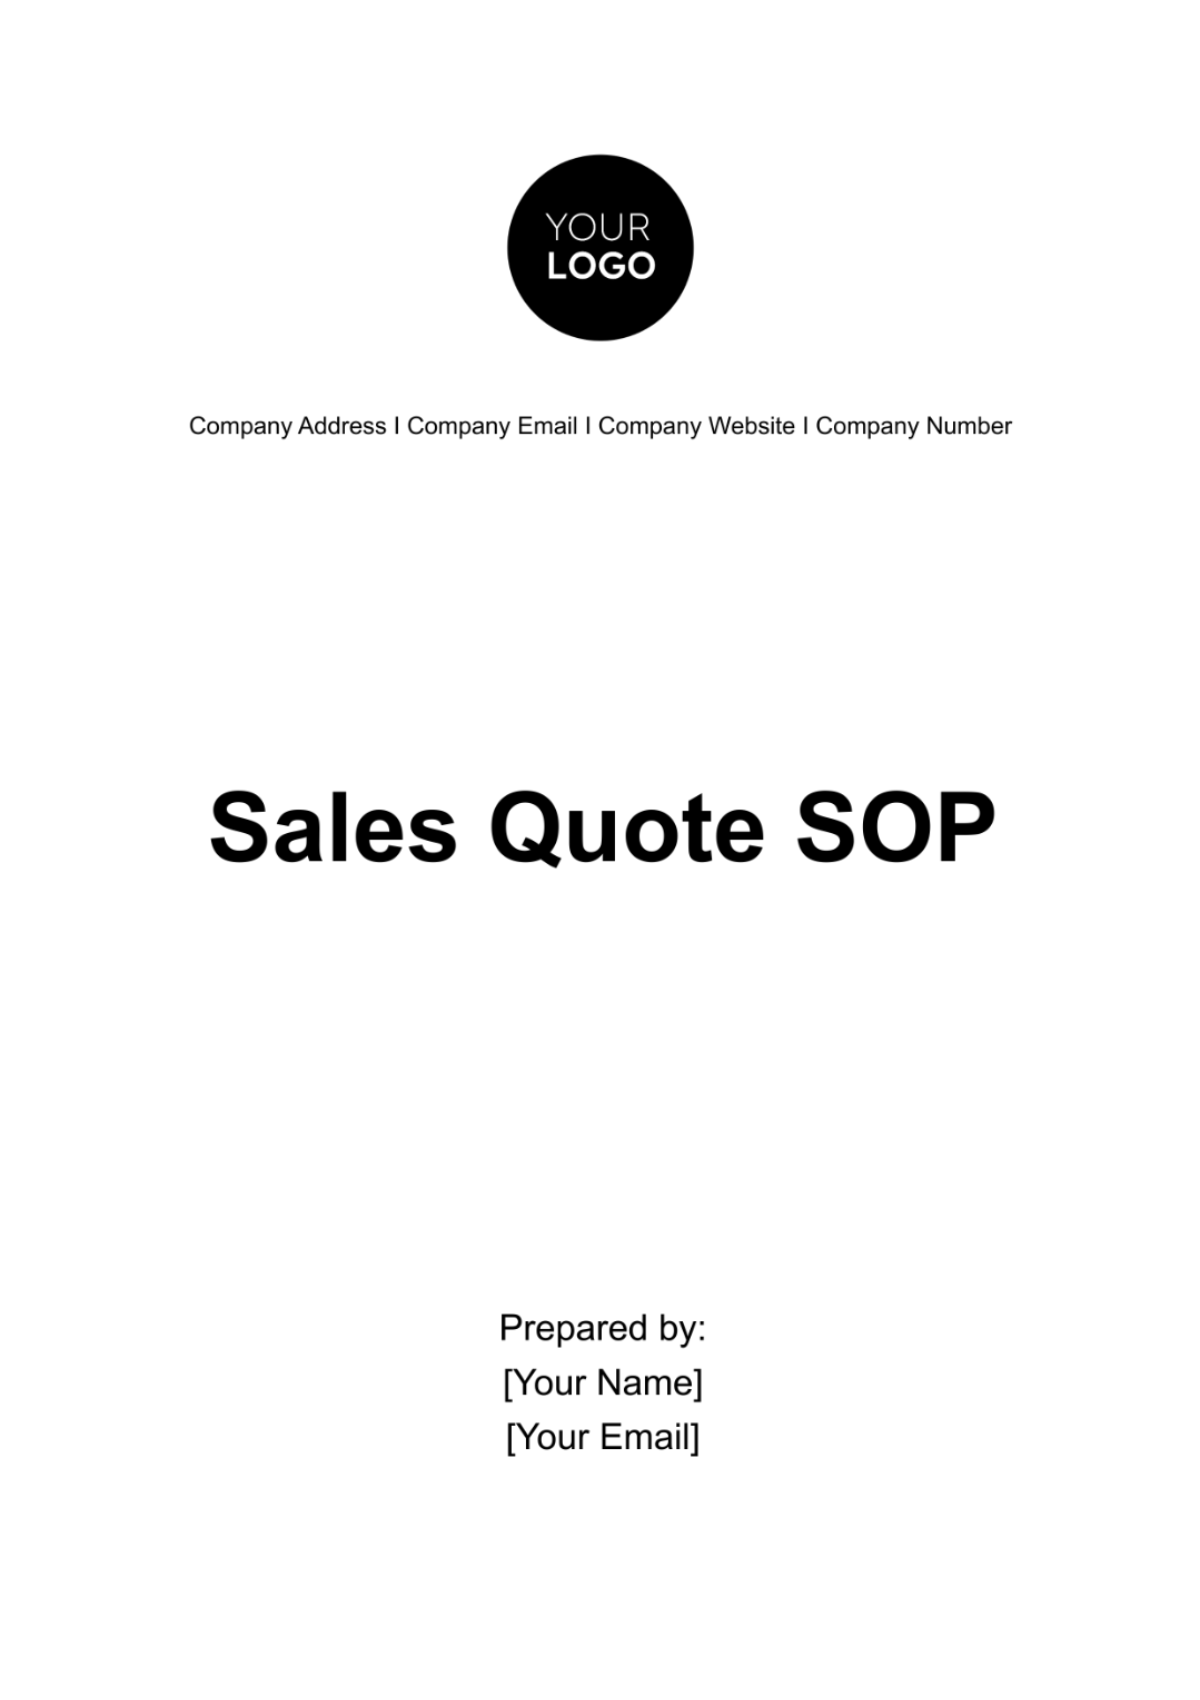 Sales Quote SOP Template